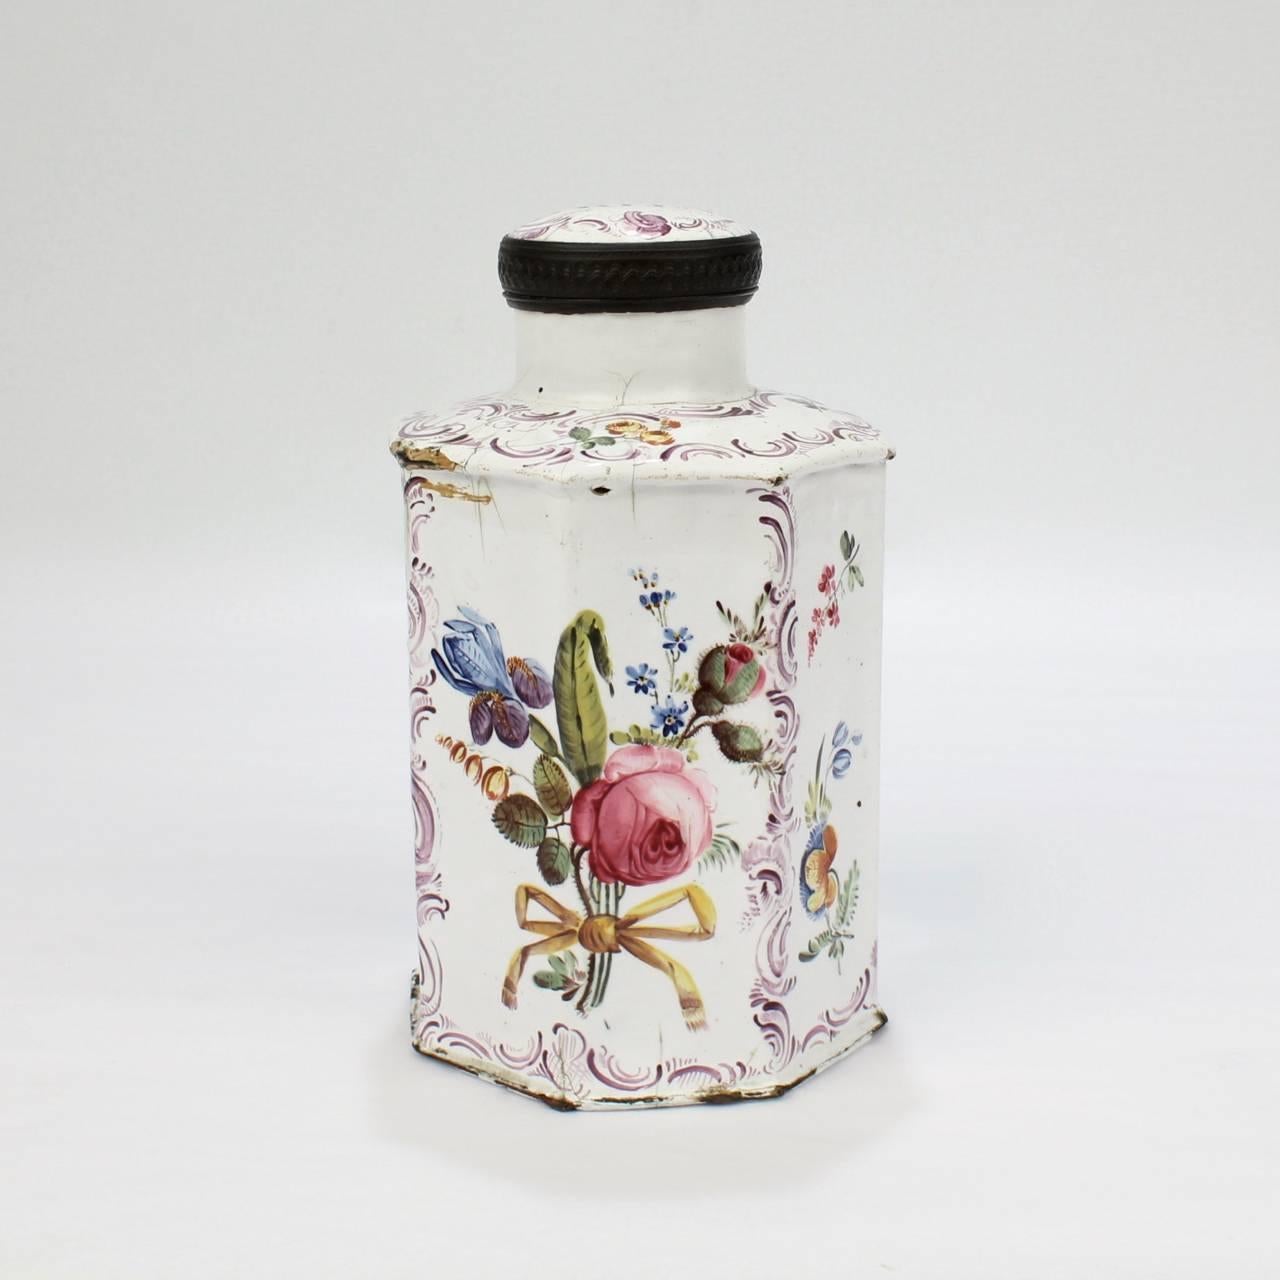 A rare, 18th century English Bilston or Battersea enamel green tea caddy.

Likely manufactured in South Staffordshire.

Of octagonal form with a white enamel on copper. Decorated with floral bouquets and sprays, bows, and purple swags. The top